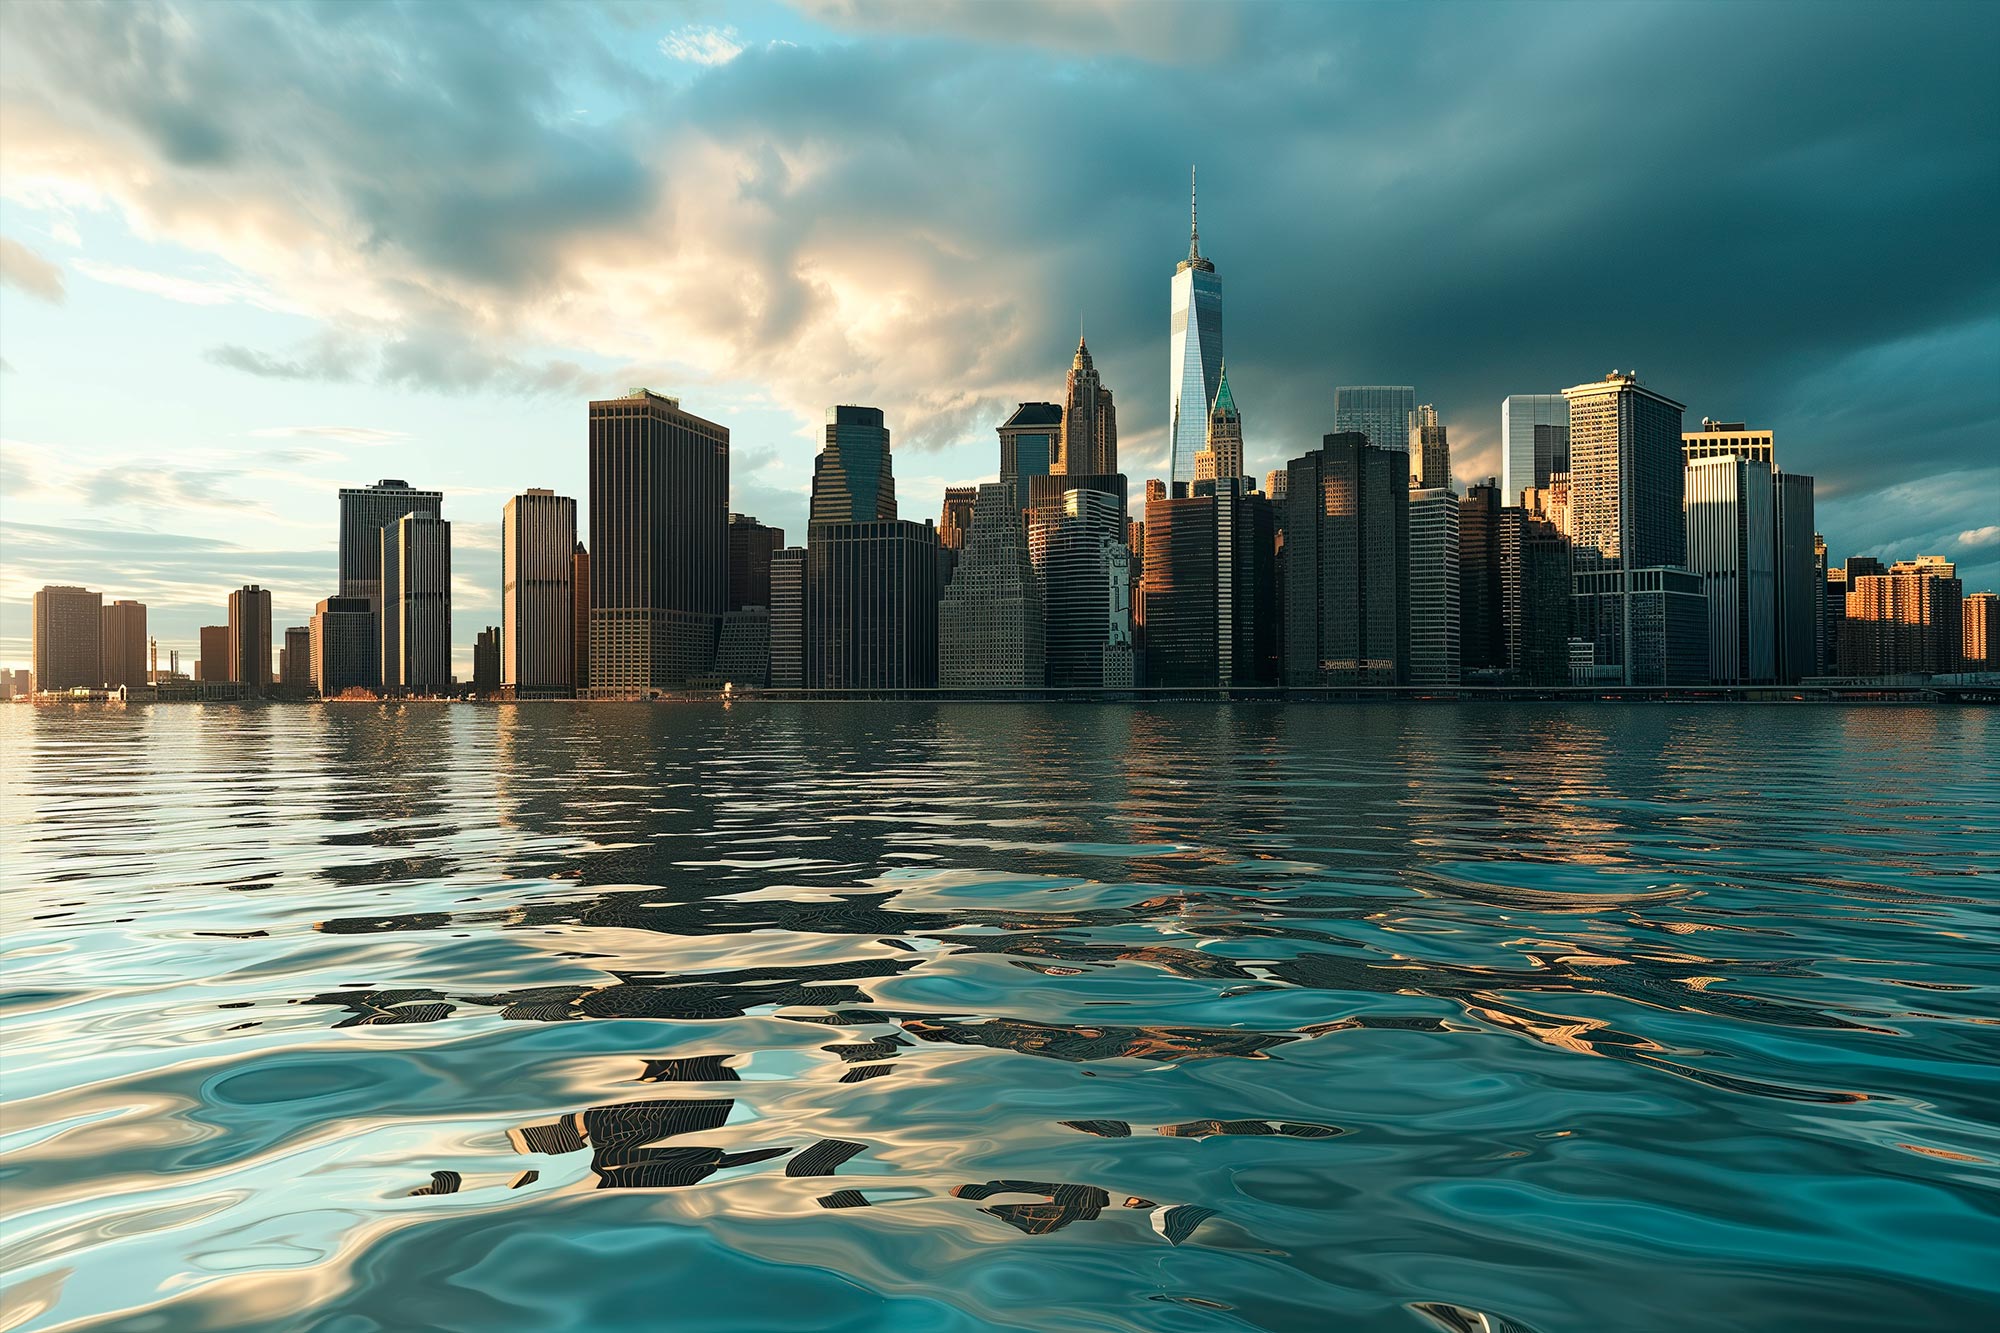 New York City is sinking due to its million-plus buildings, study says